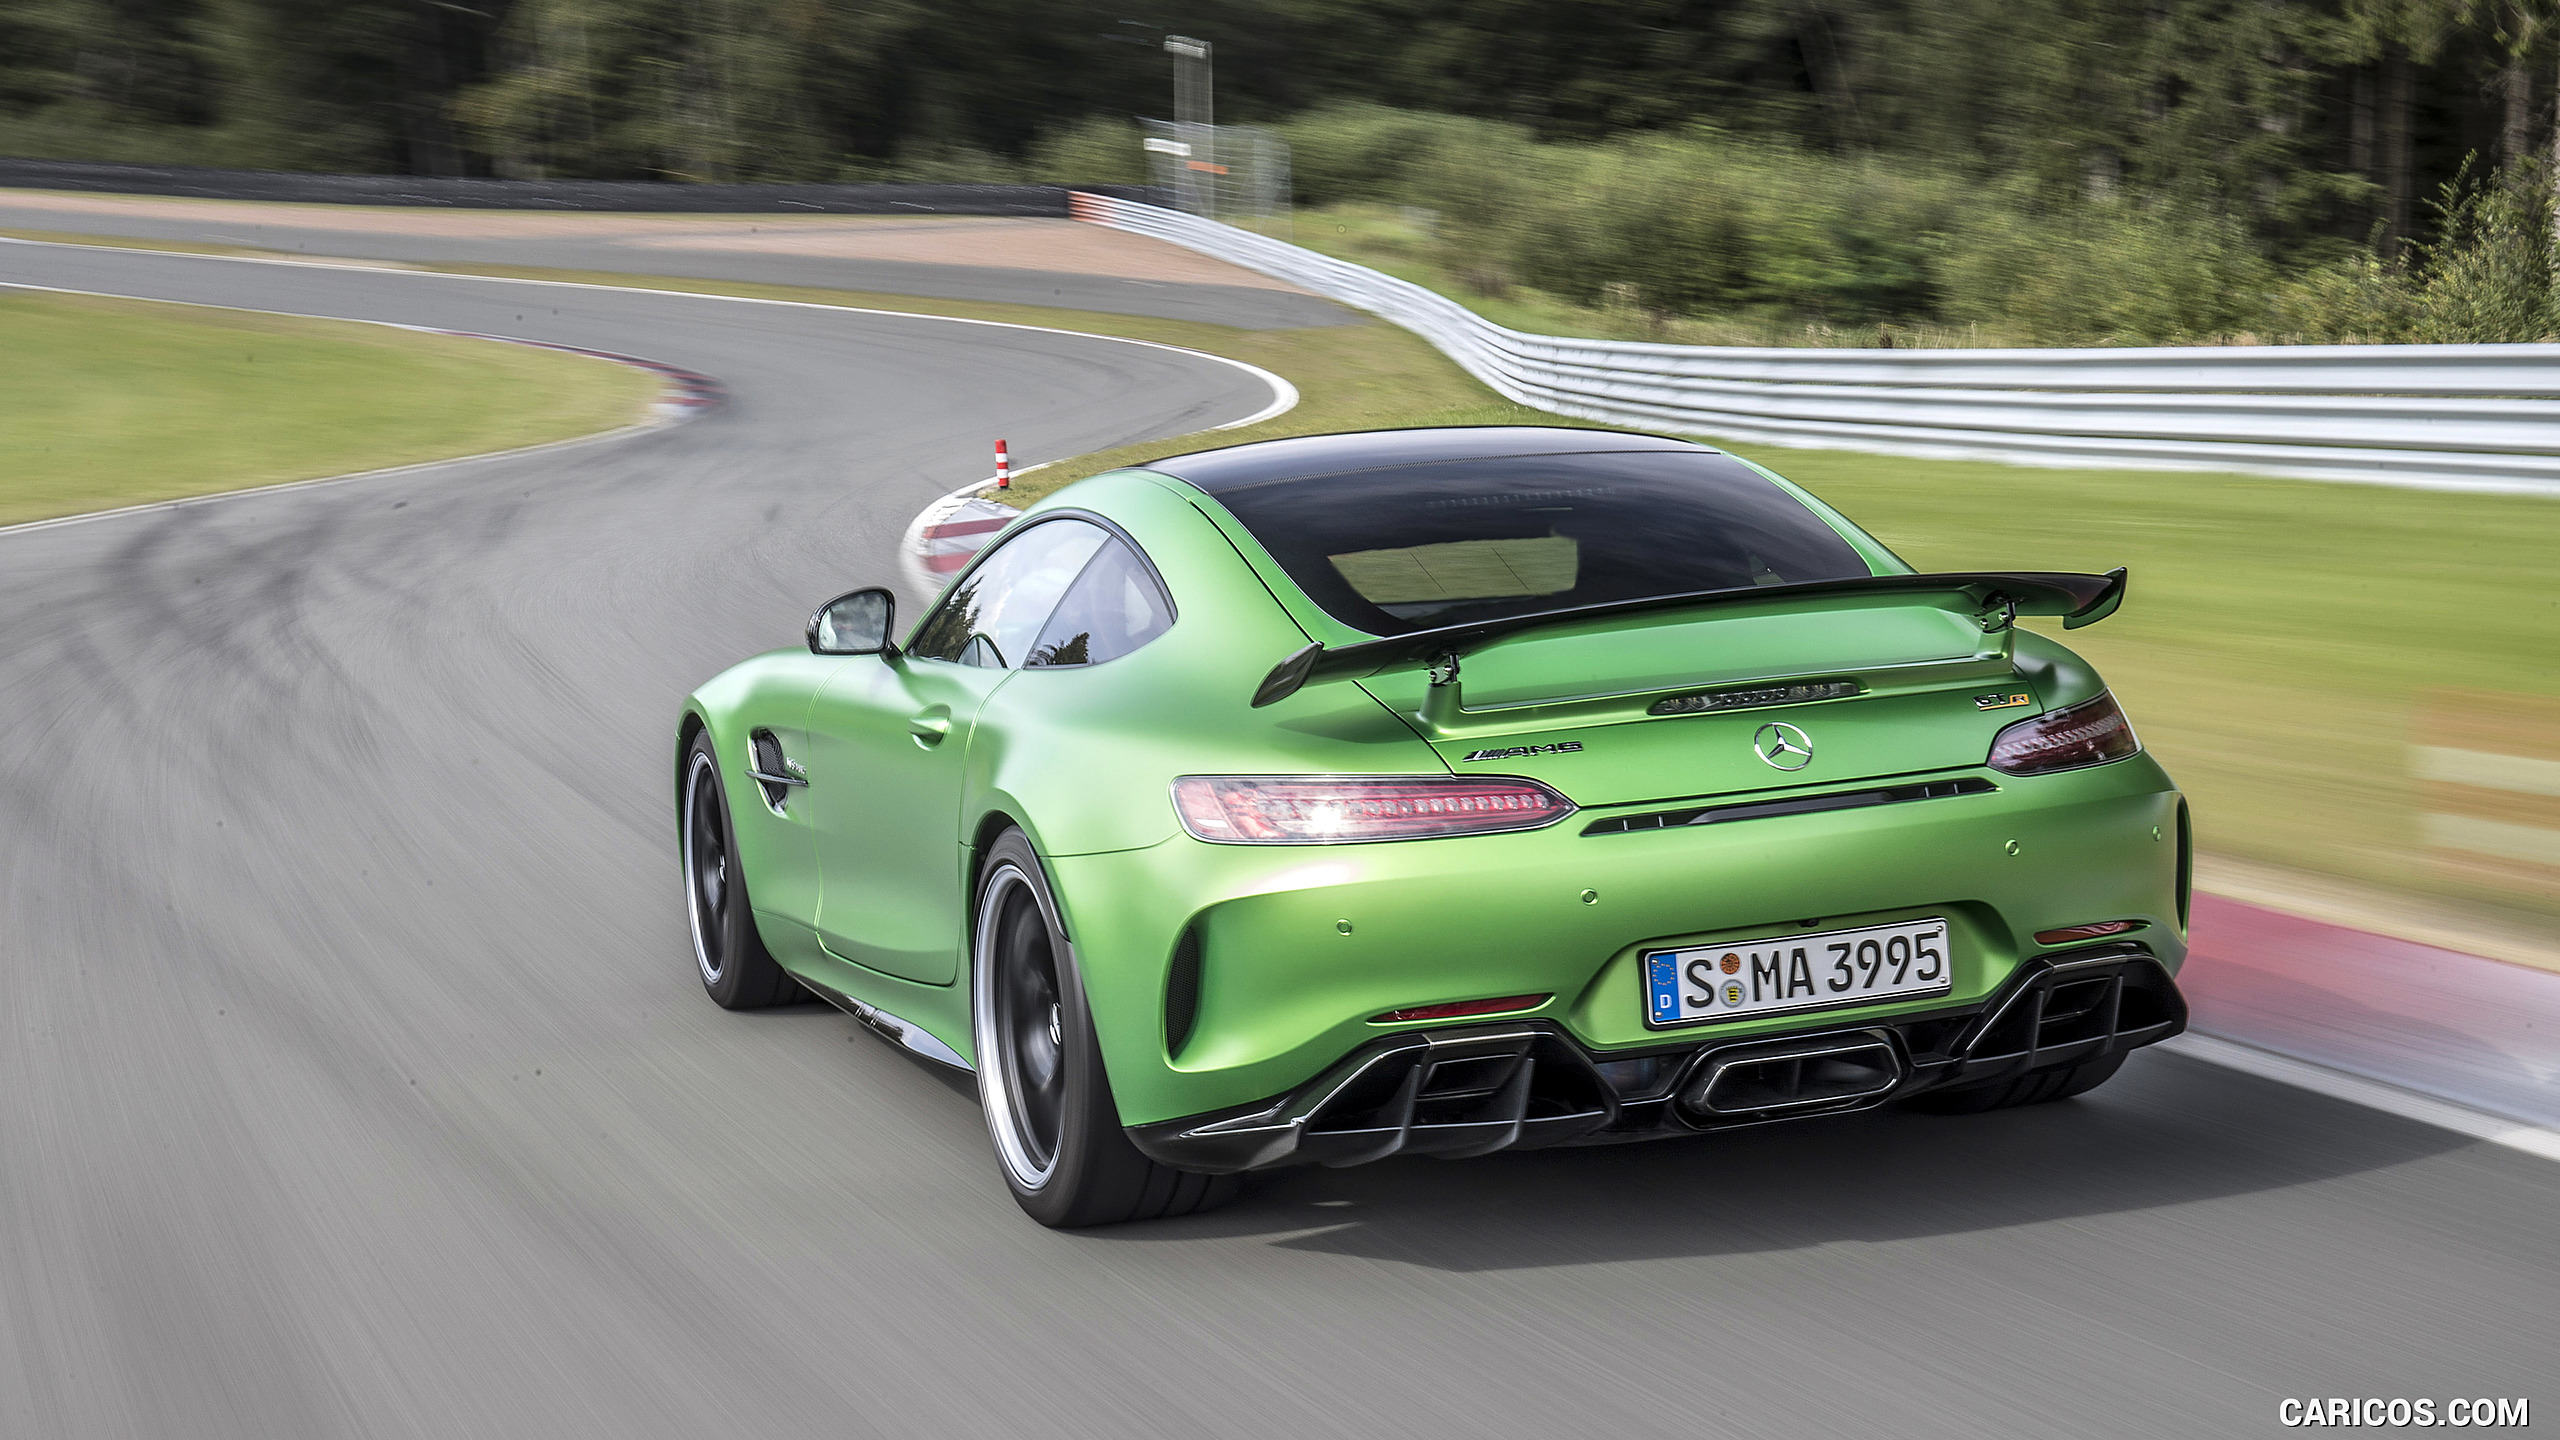 2017 Mercedes-AMG GT R Coupe - Rear, #157 of 182